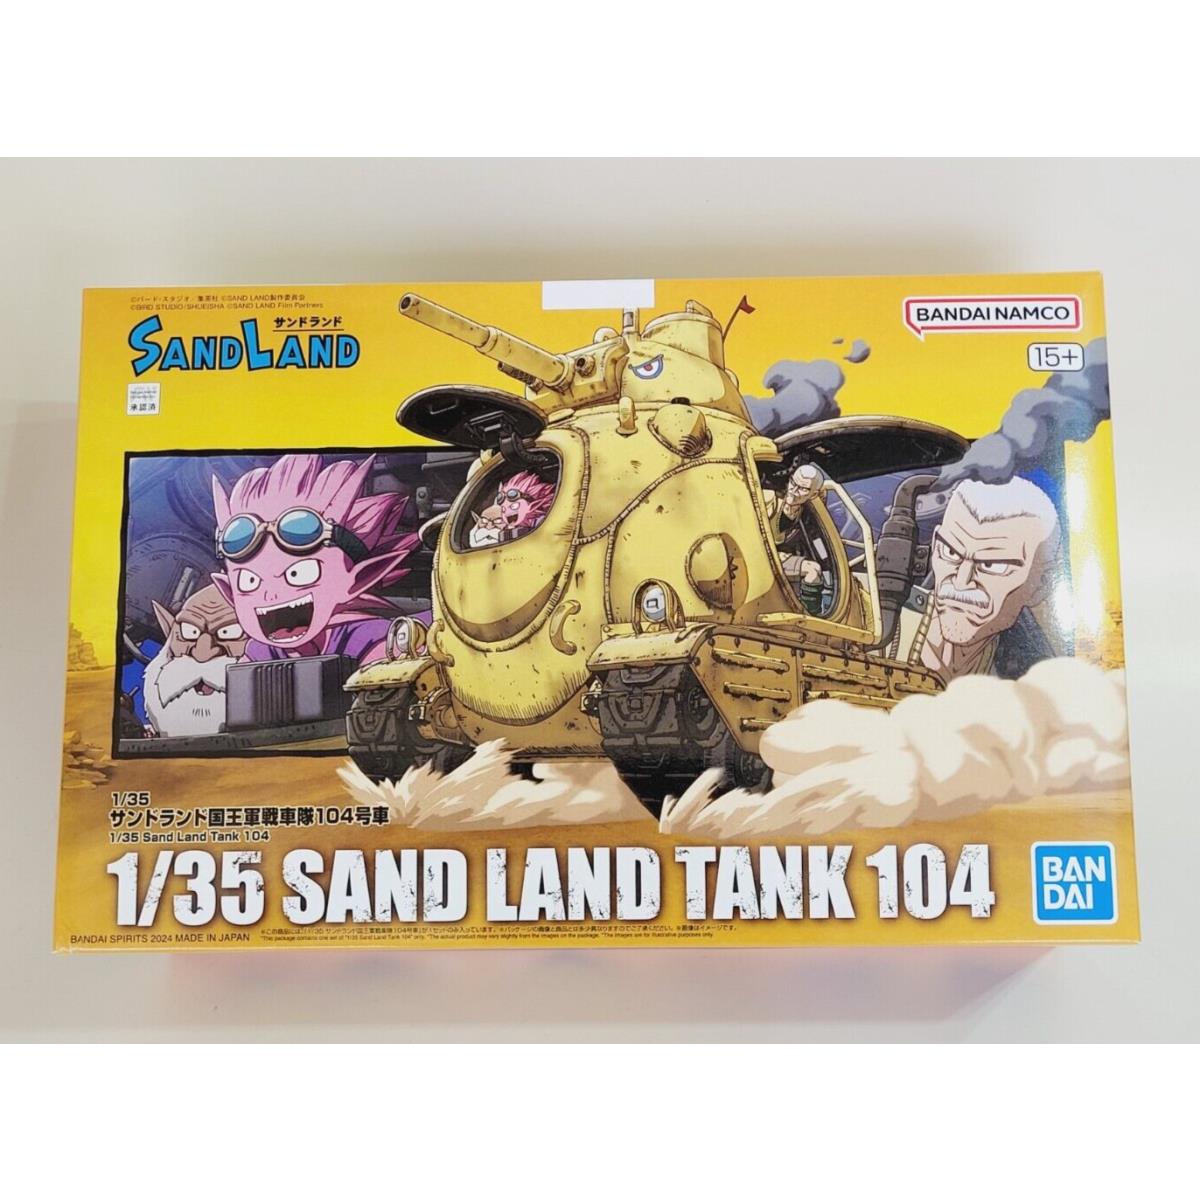 Bandai Namco Sand Land Tank 104 -scale 1:35 - Ages 15+ - Made In Japan